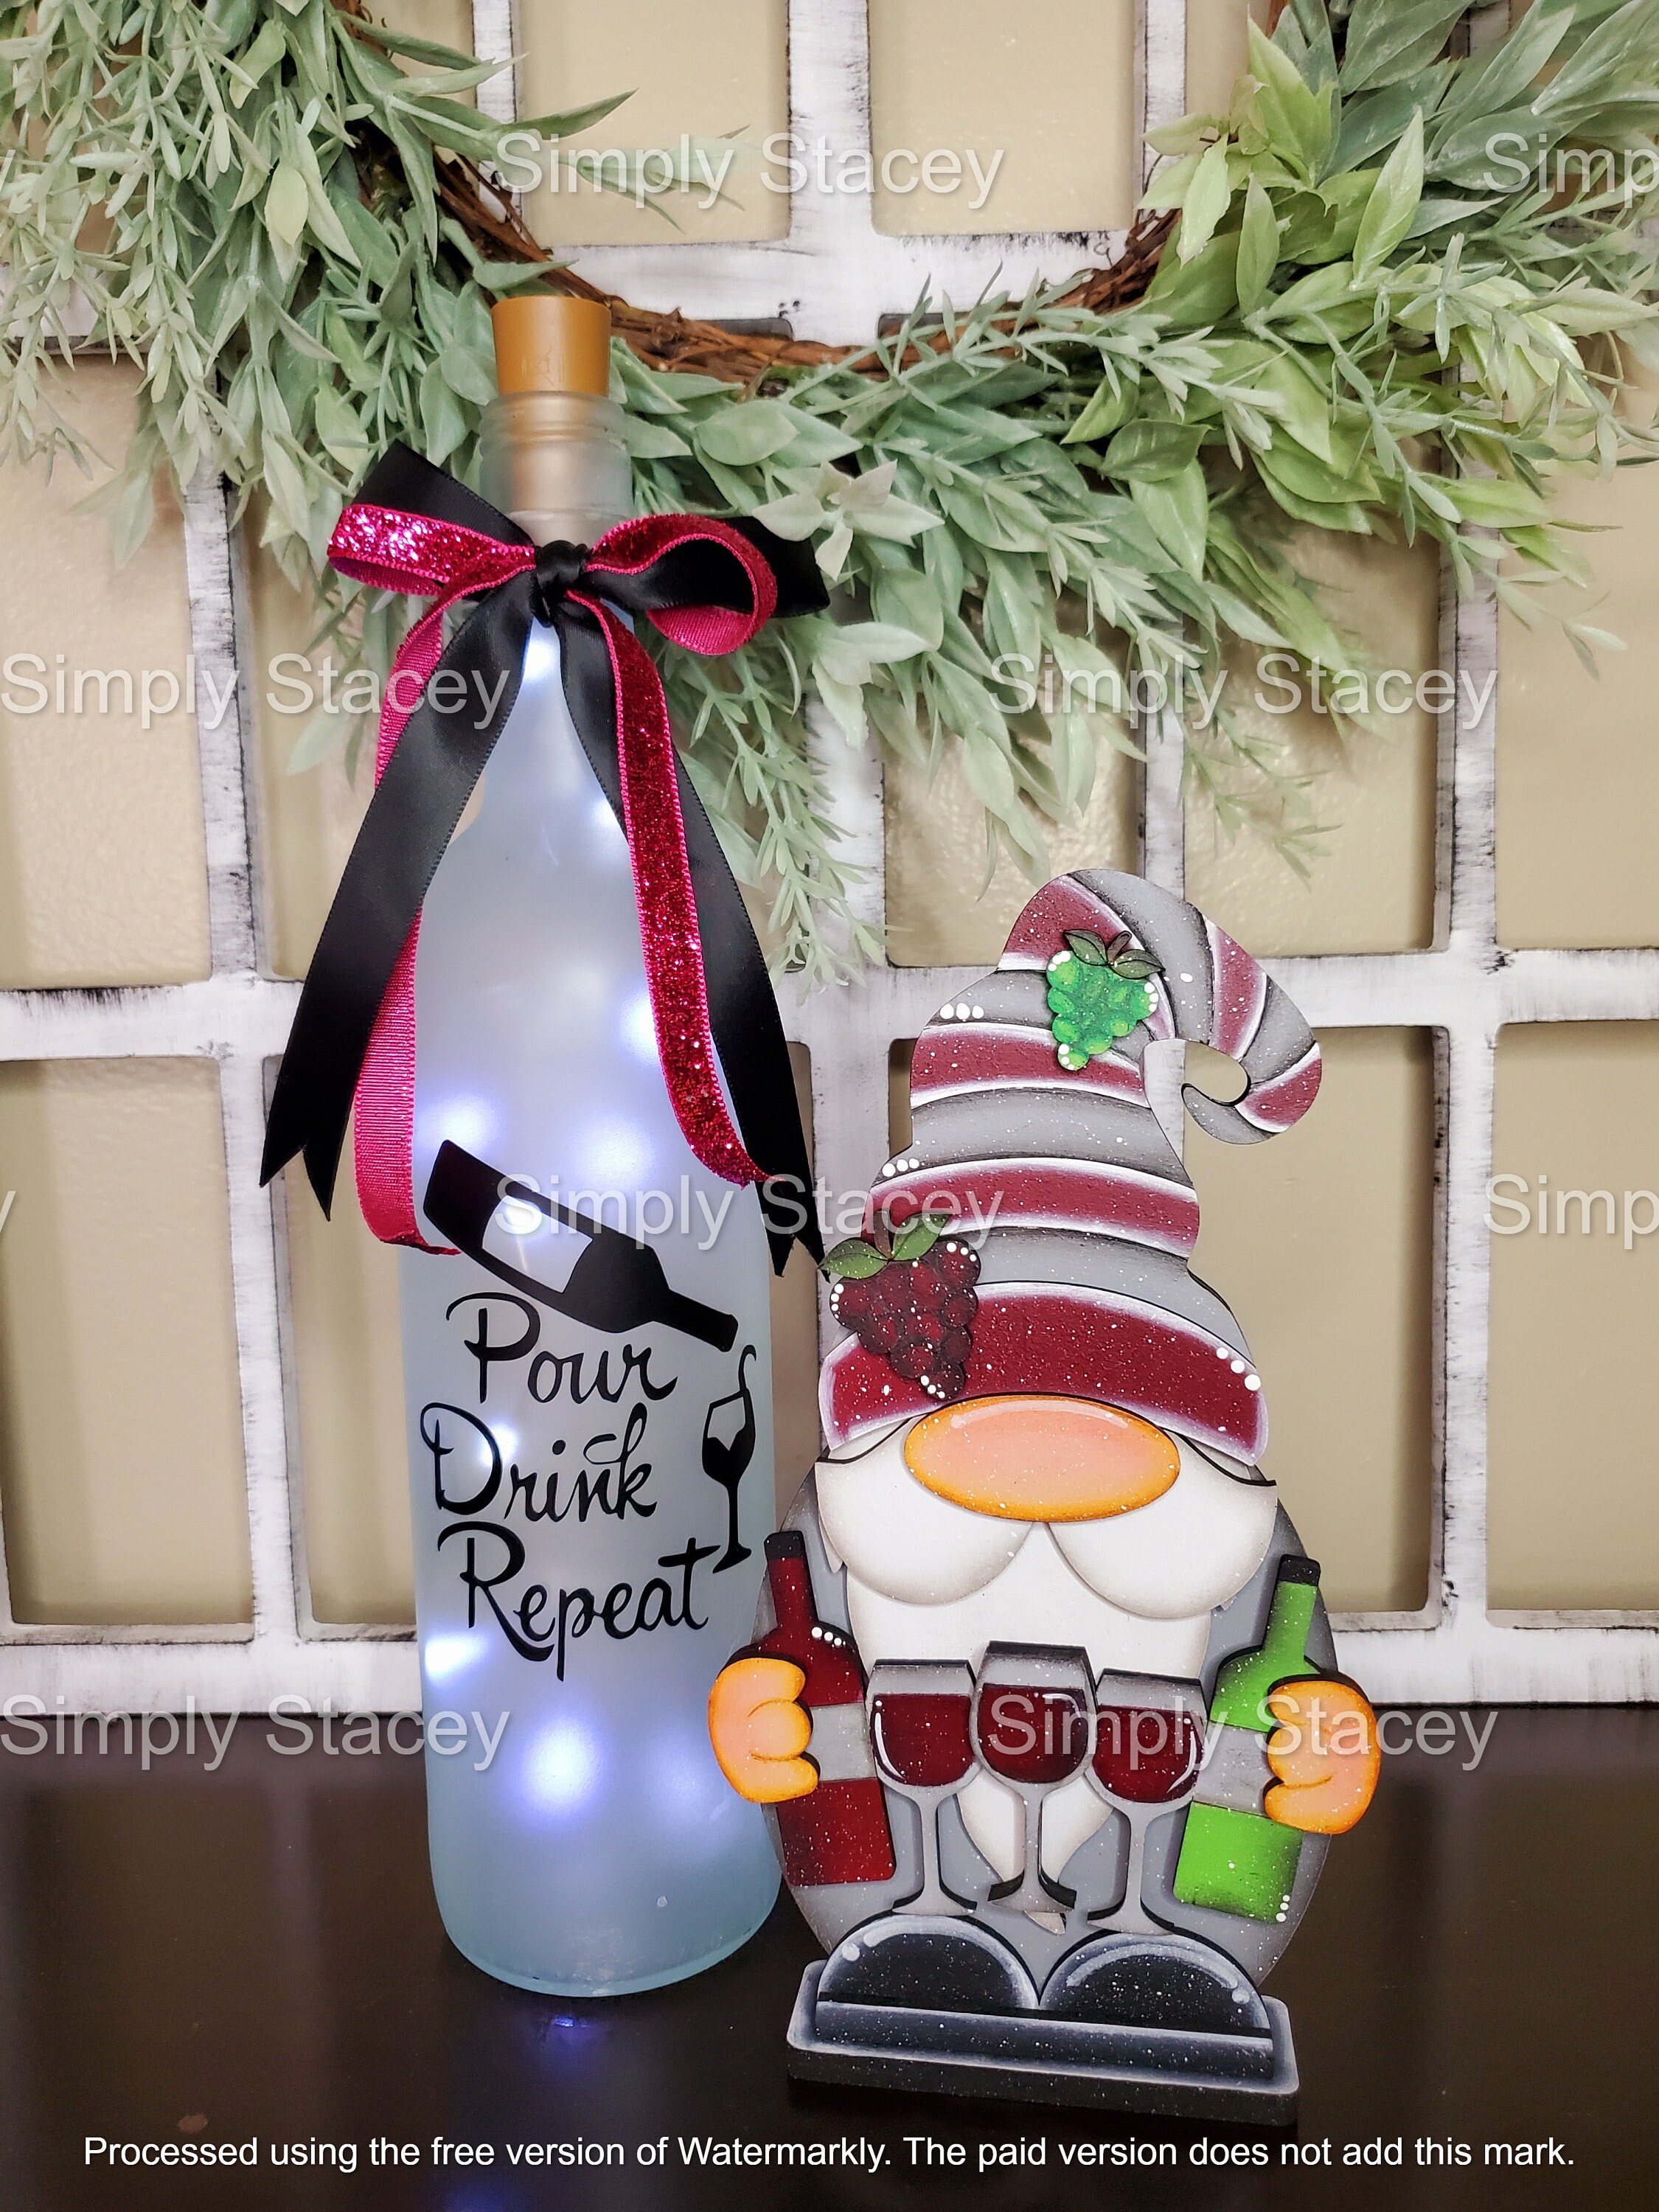 Gnome Ornament Kit, DIY Christmas Gift, Craft Fun at Home, for